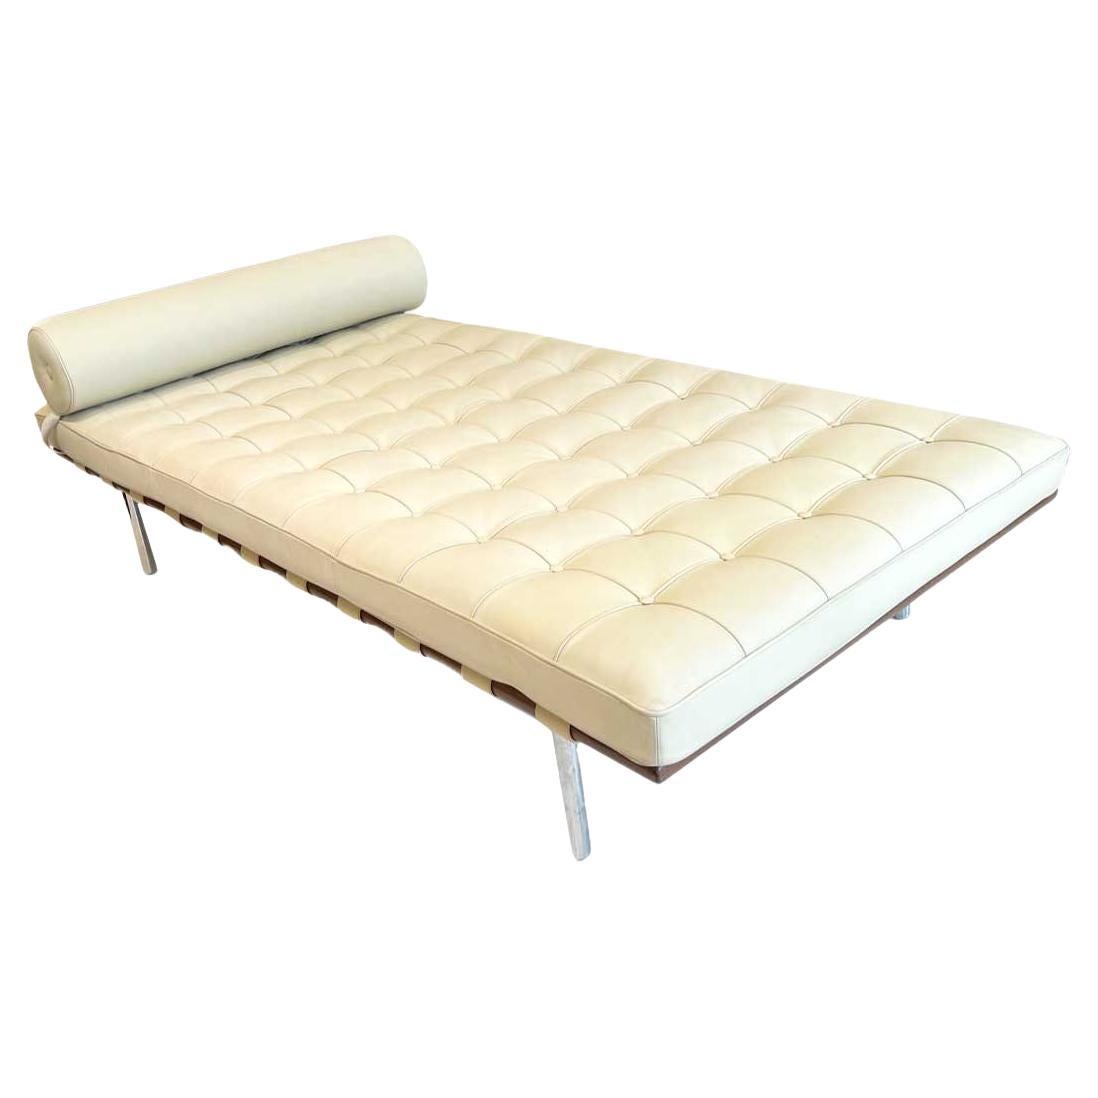 Barcelona Couch - Mies van der Rohe for Knoll style For Sale